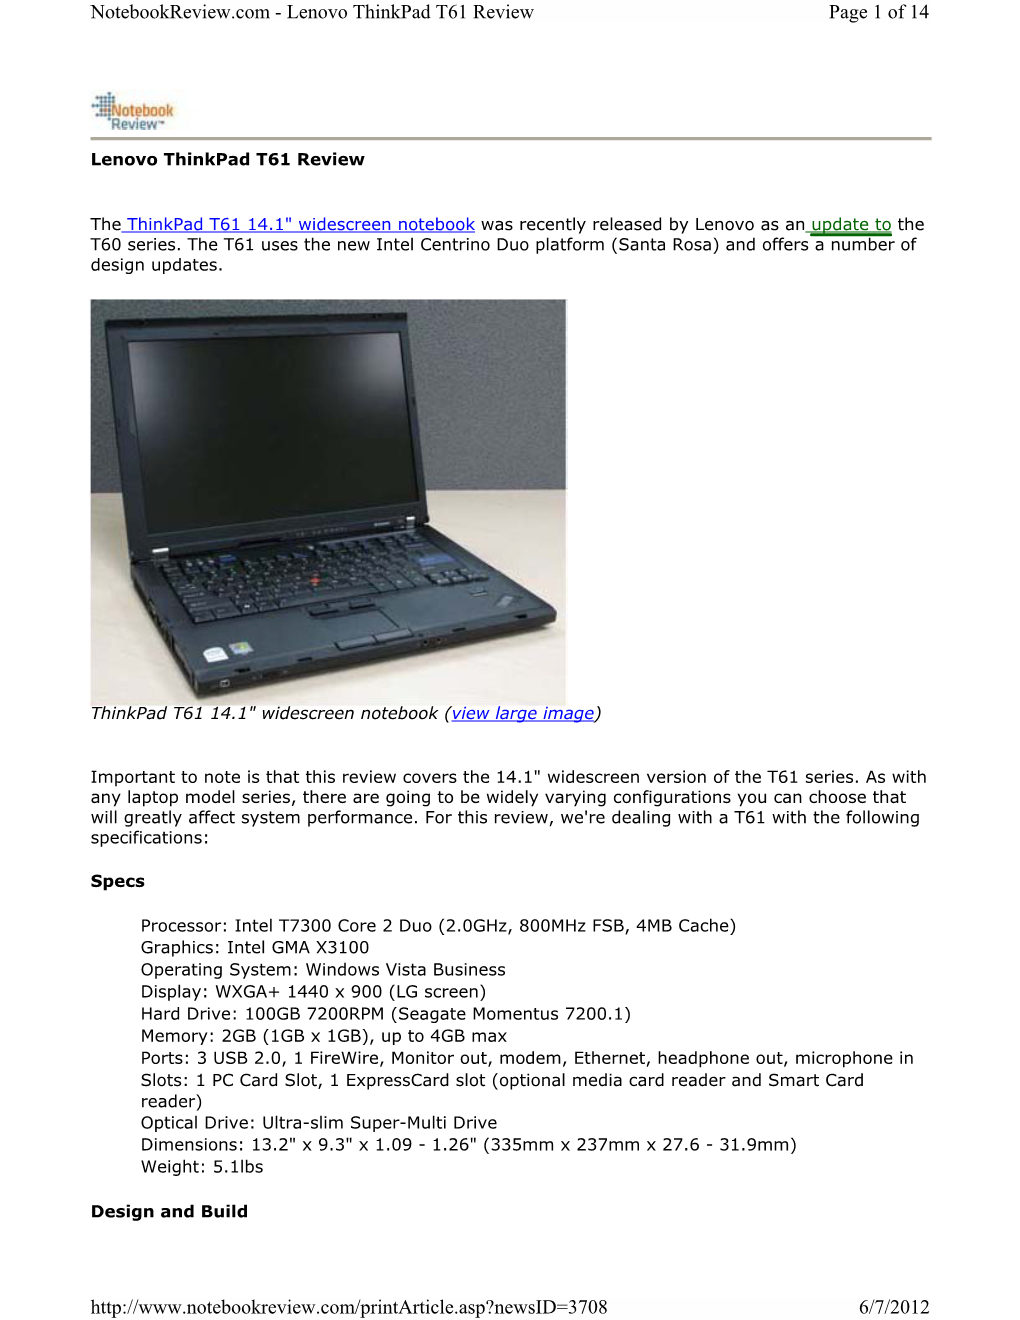 Notebookreview.Com - Lenovo Thinkpad T61 Review Page 1 of 14